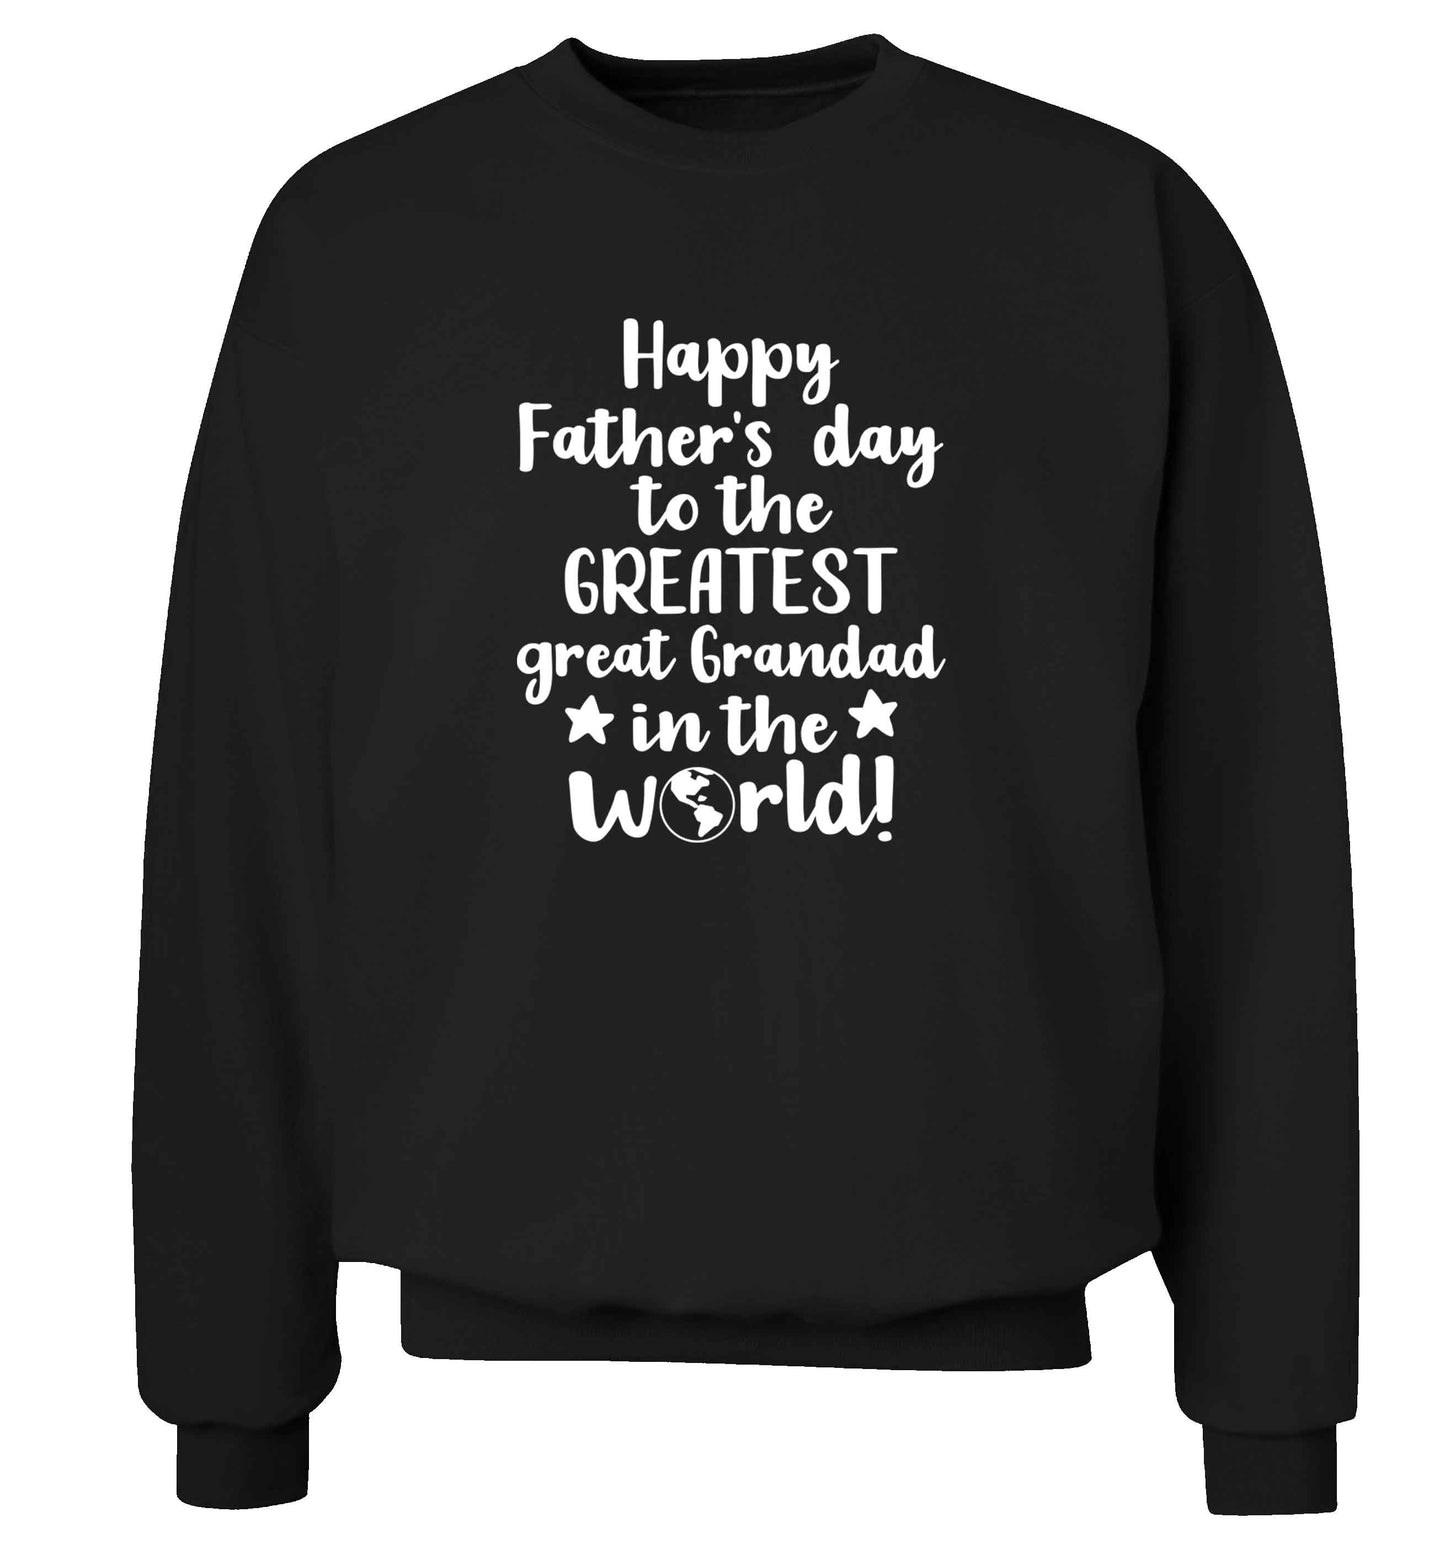 Happy Father's day to the greatest great grandad in the world adult's unisex black sweater 2XL